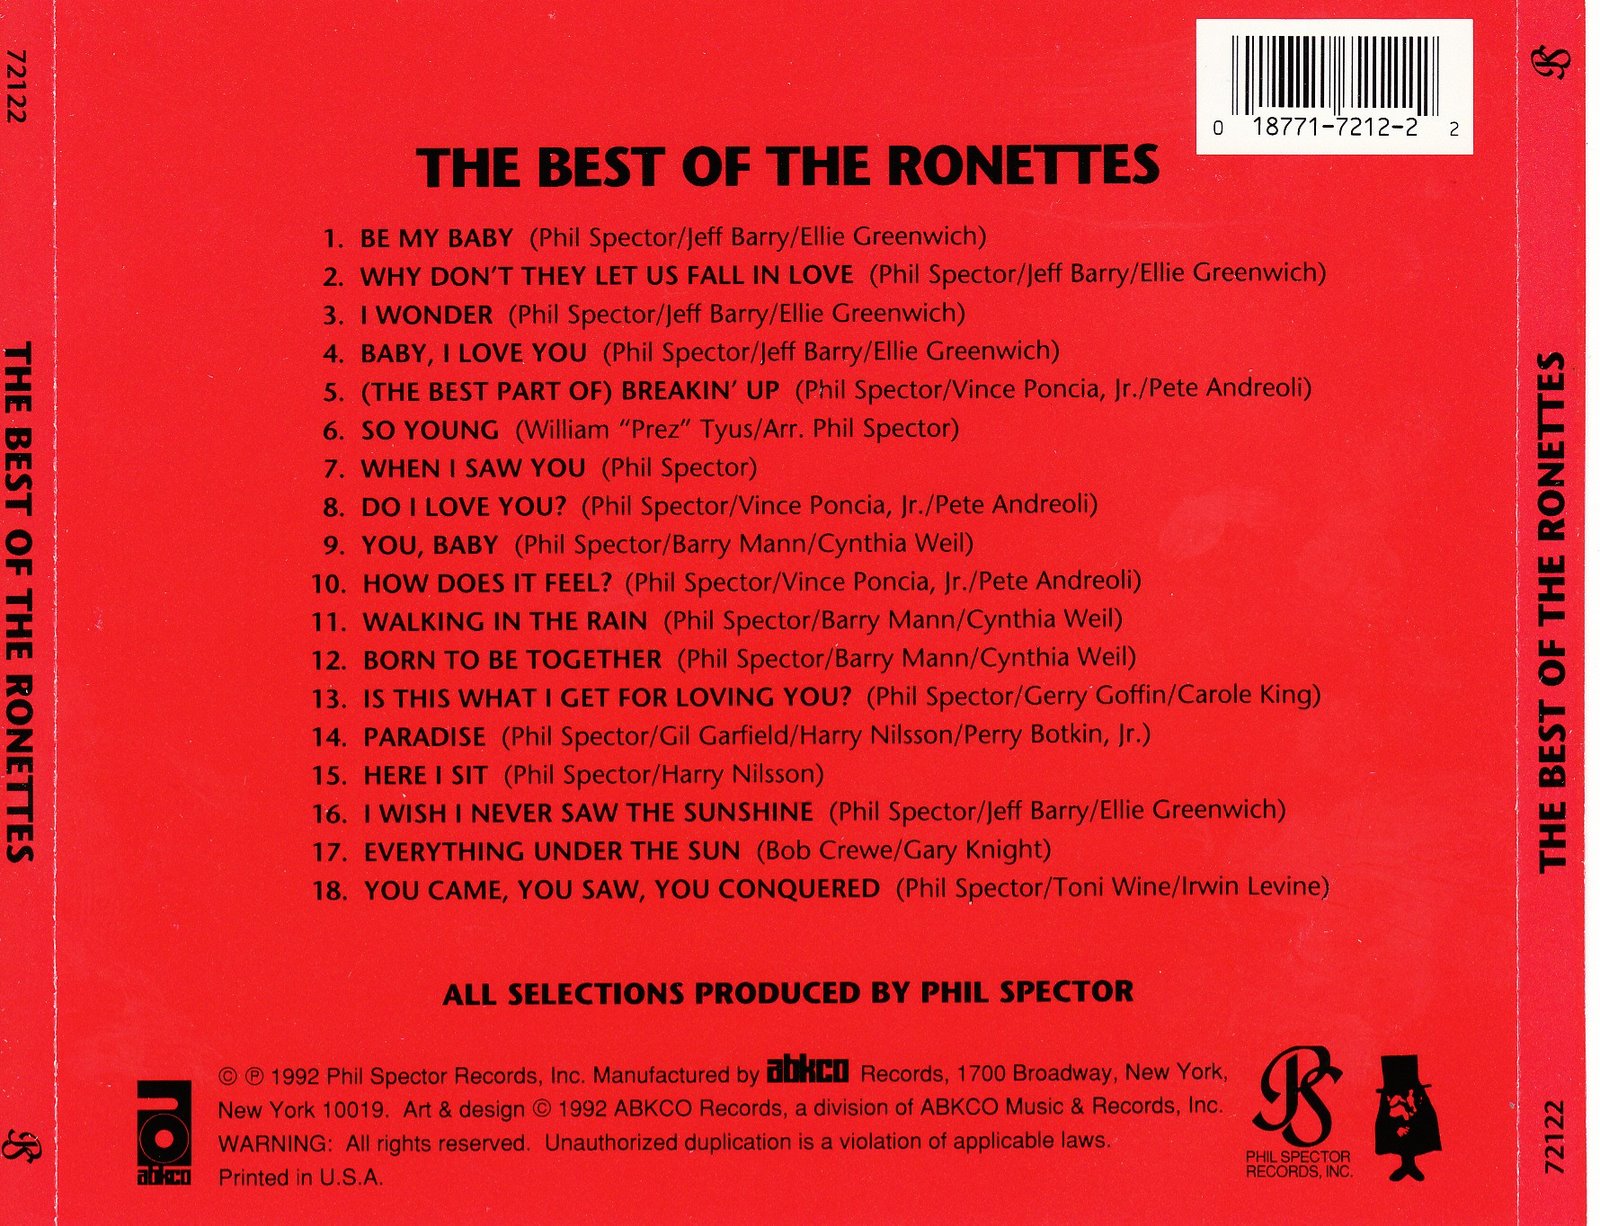 [[AllCDCovers]_the_ronettes_the_best_of_the_ronettes_1992_retail_cd-back[1].jpg]